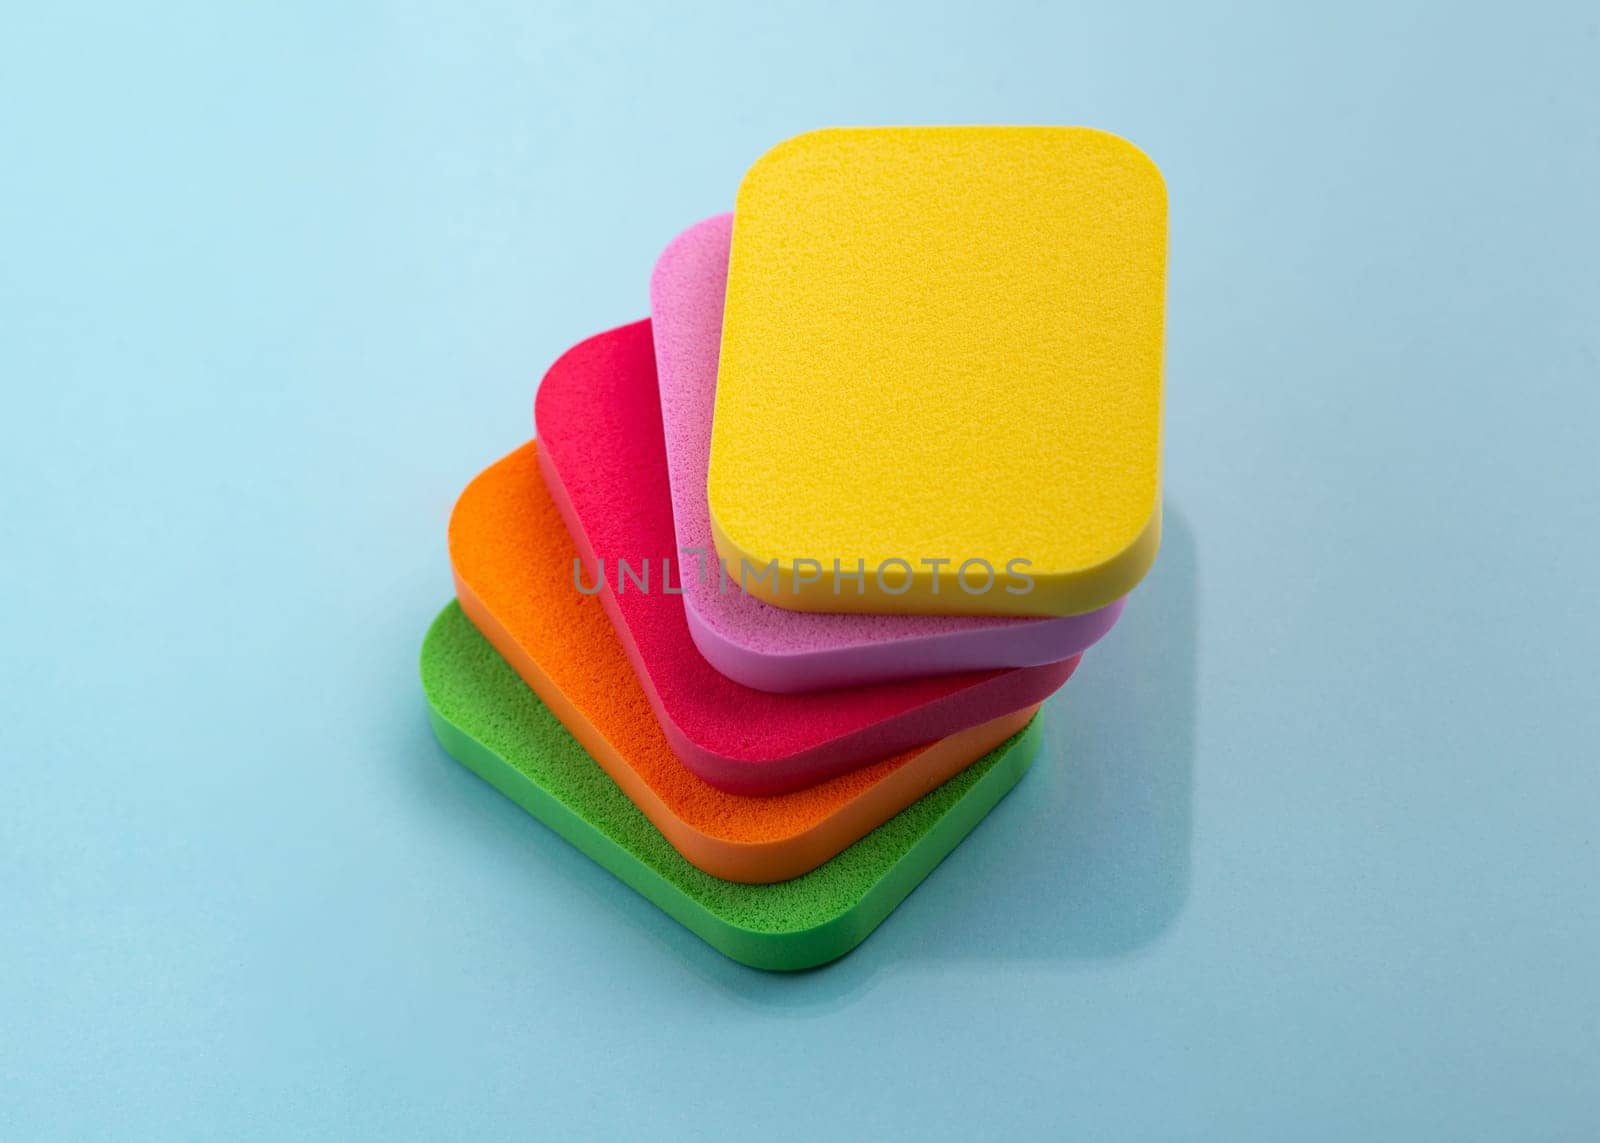 Heap of colorful cosmetic sponges on blue background. Top view by A_Karim